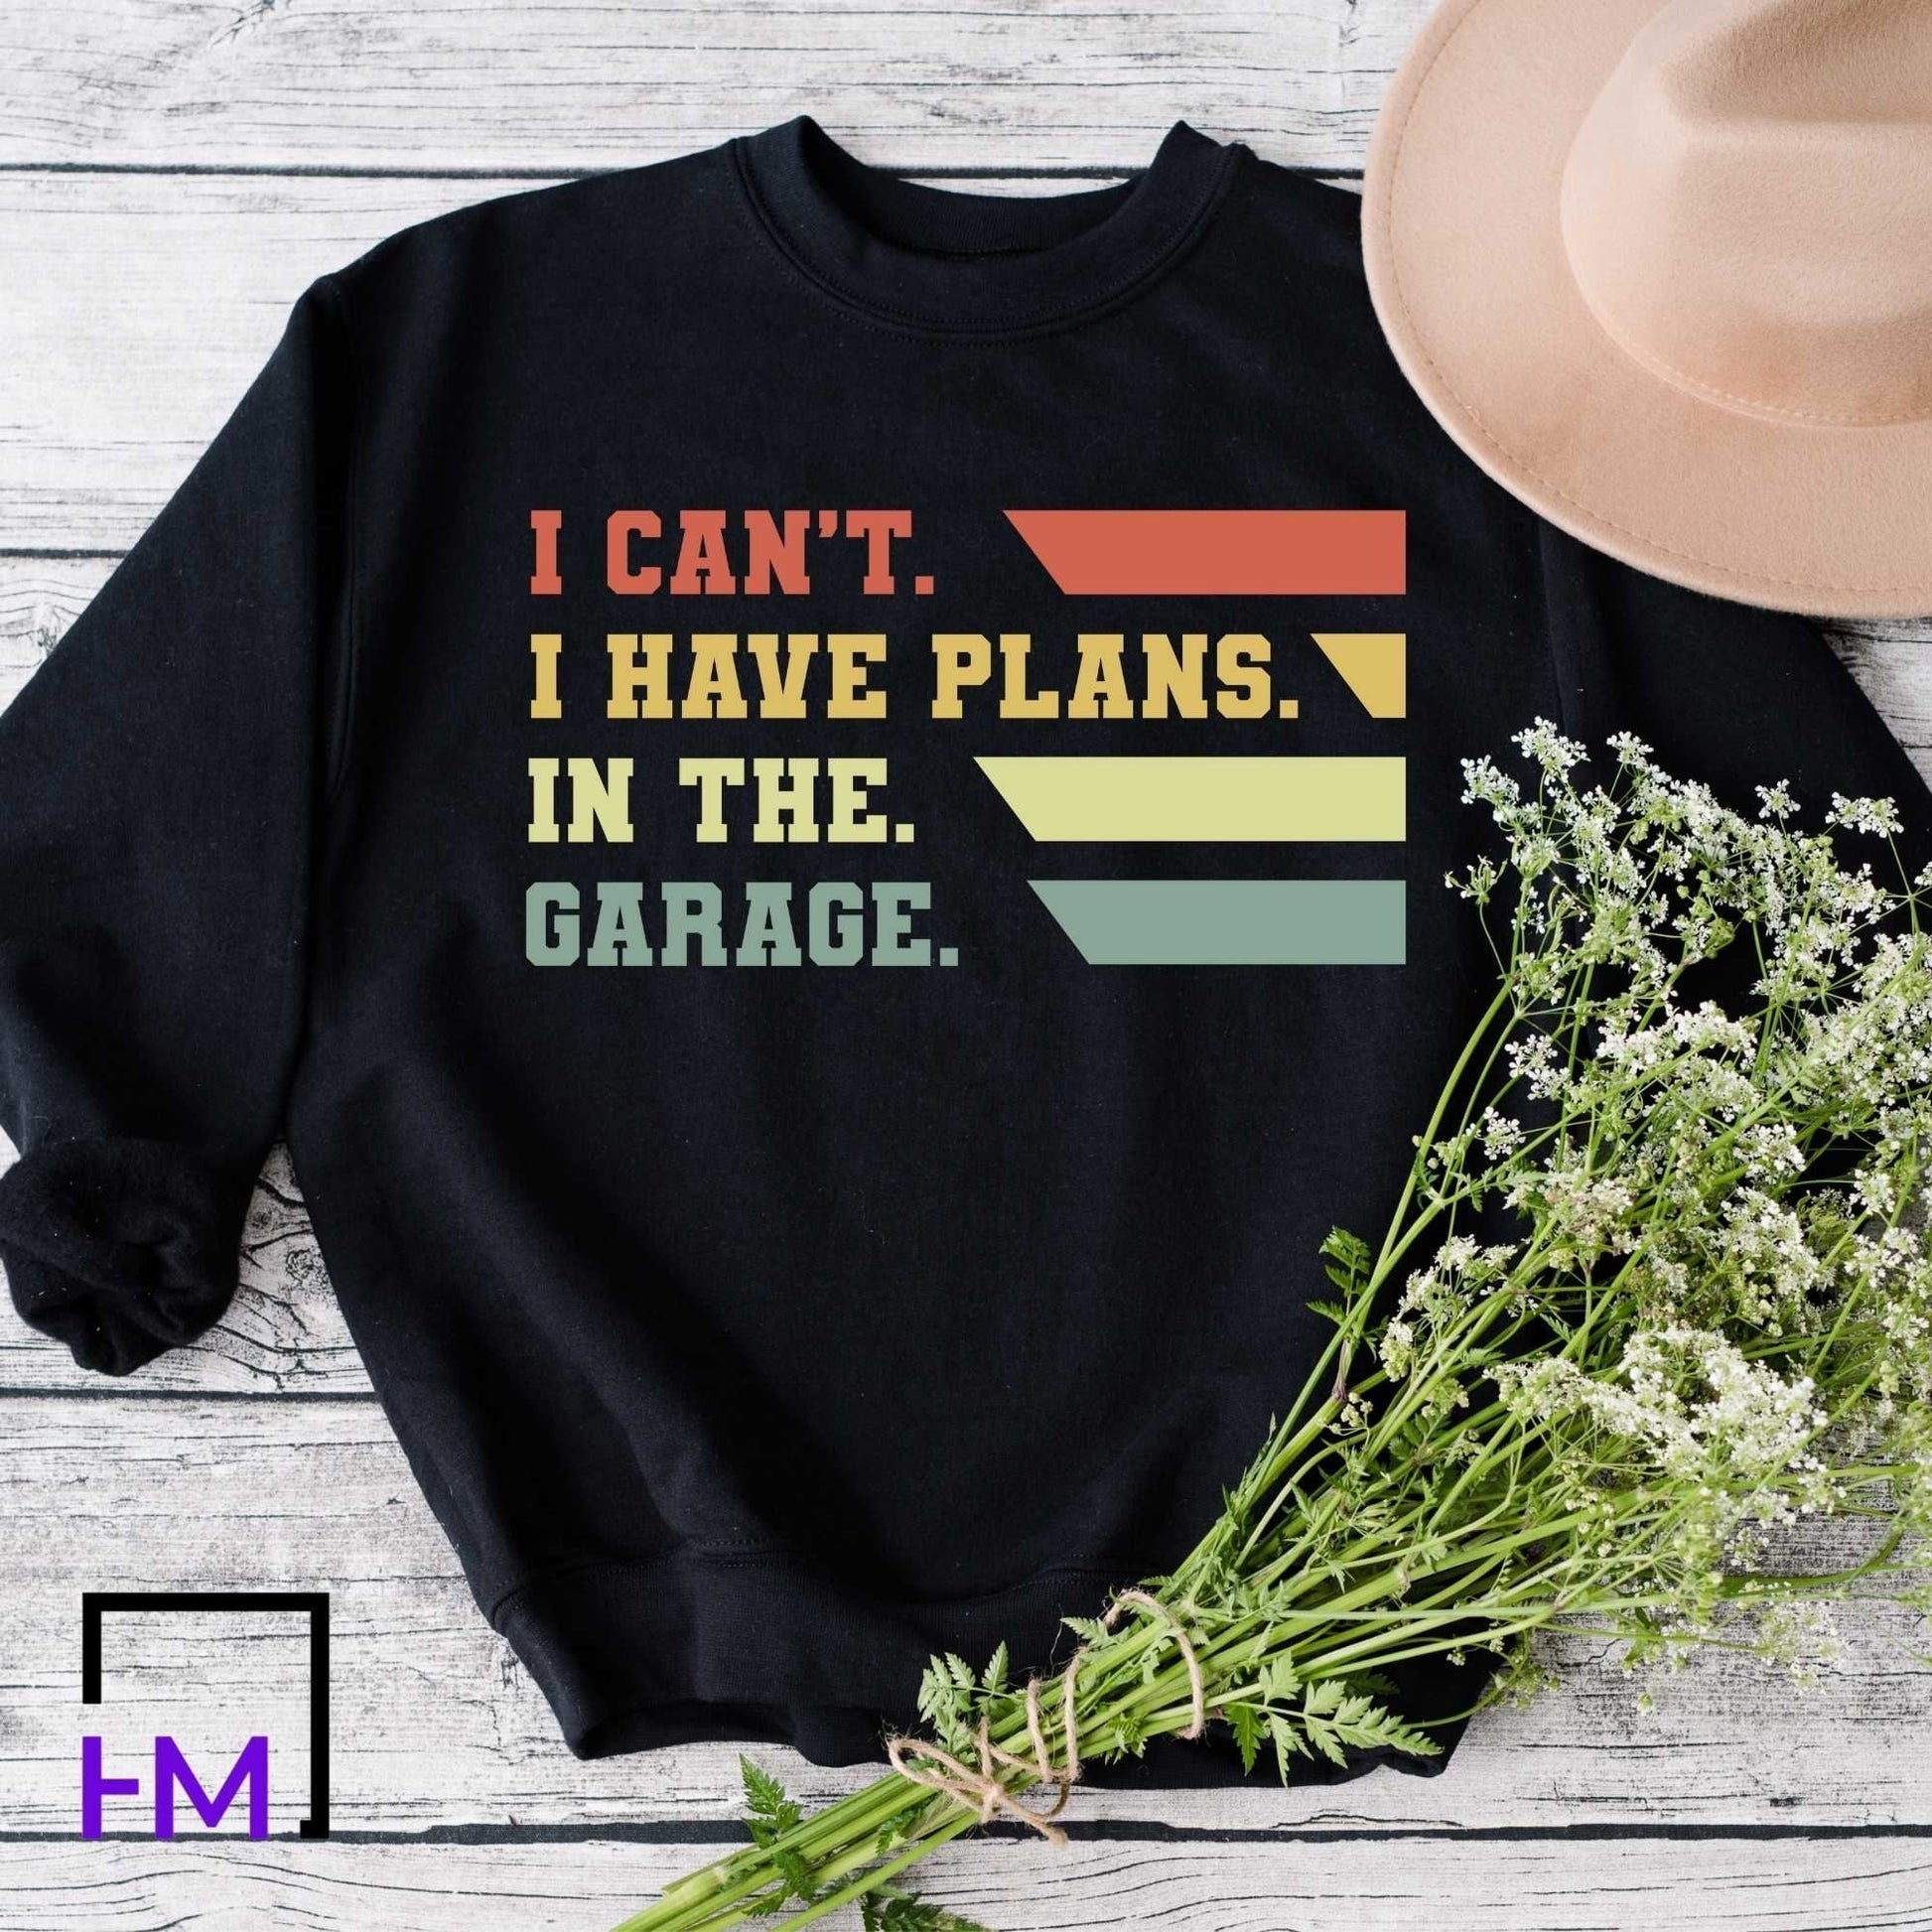 Car Enthusiast Shirt, Car Guy Shirt, Dad Gift, Car Lover Gift, Father's Day Gift, Garage Weekends, Cars Collector Shirt, Funny Car Lover